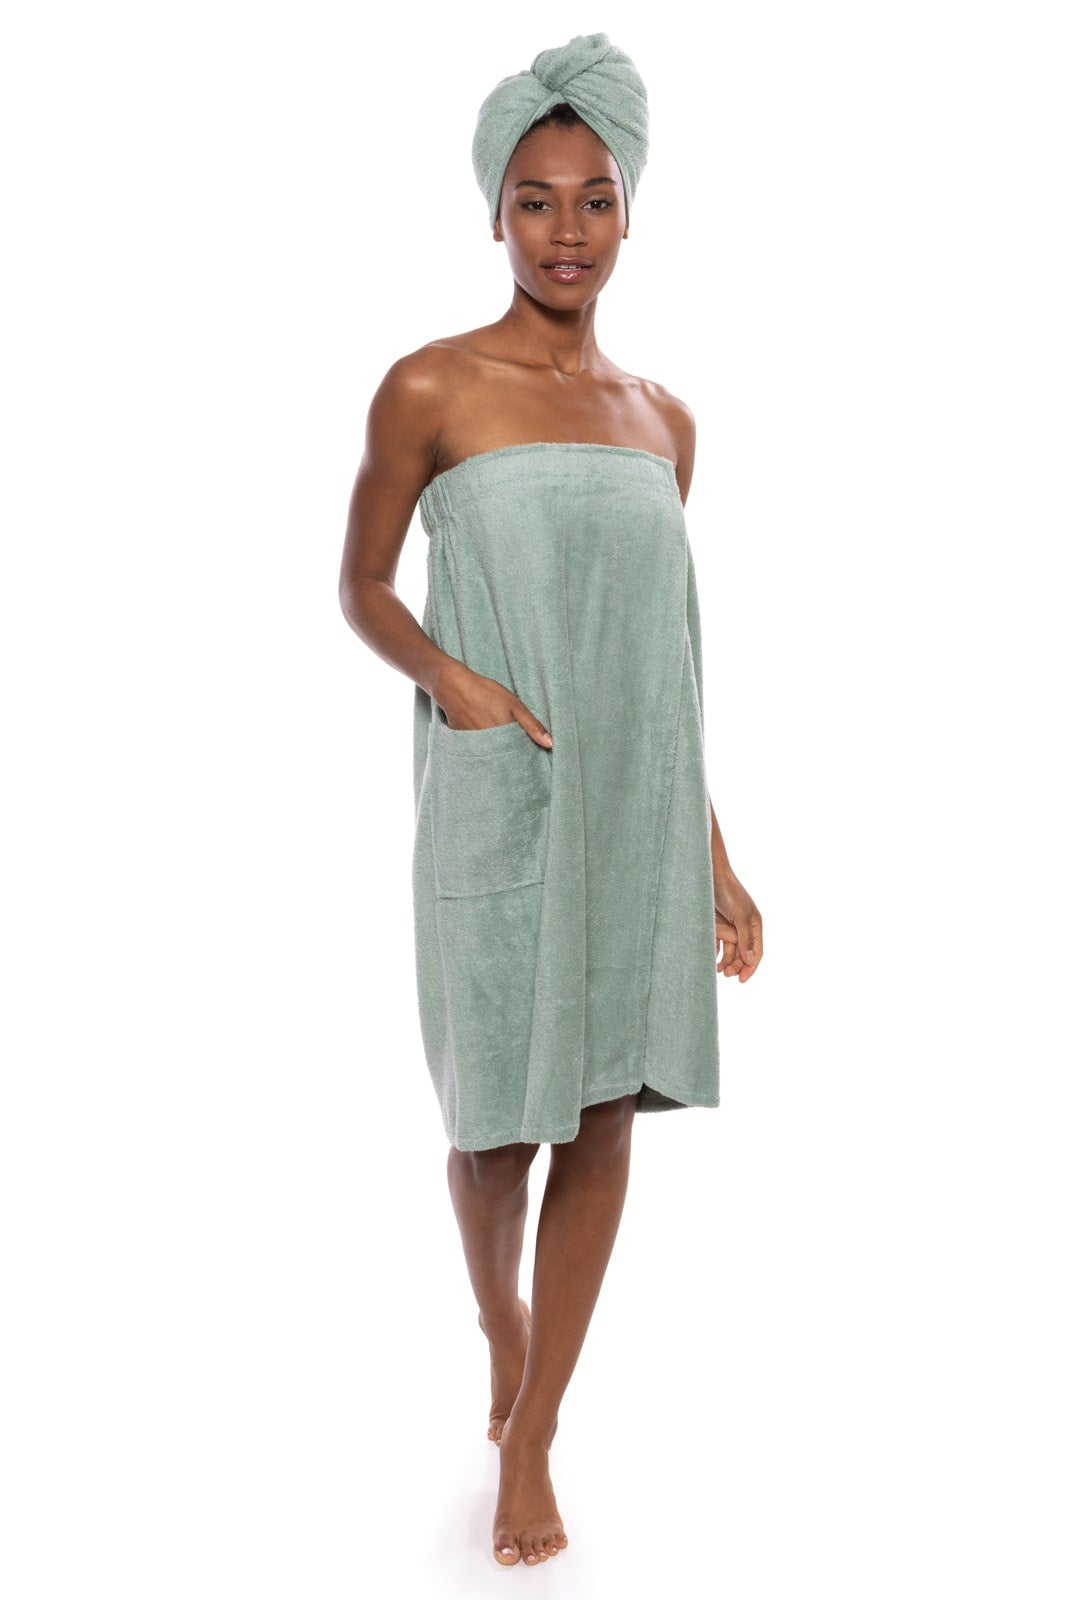 Texere Women's 2pc Terry Cloth Body and Hair Wrap Womens>Spa>Set Fishers Finery Lily Green S/M 